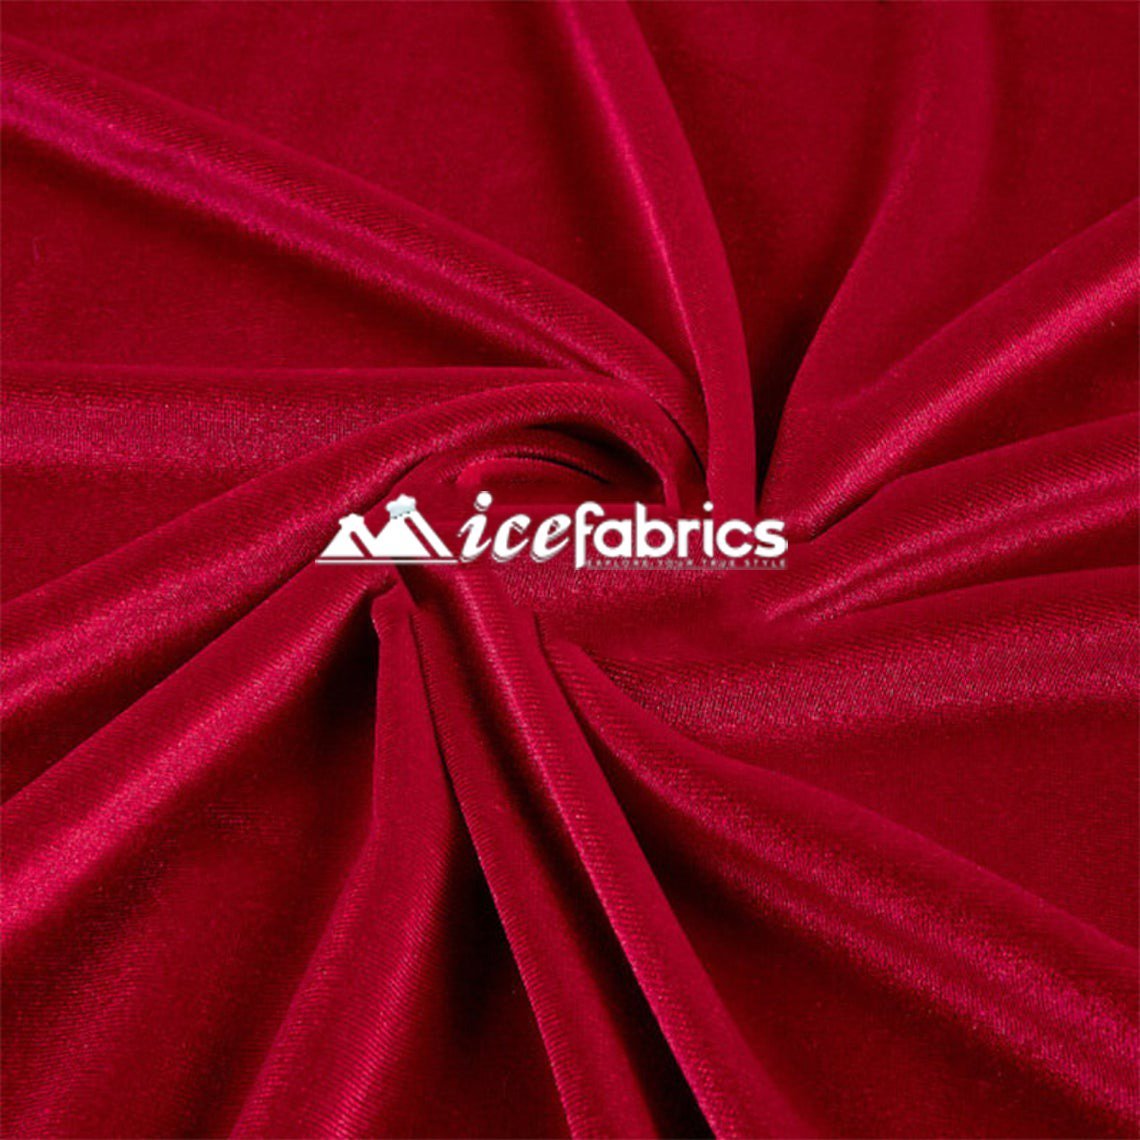 Hight Quality Stretch Velvet Fabric By The Roll (20 yards) Wholesale FabricVelvet FabricICE FABRICSICE FABRICSRedBy The Roll (60" Wide)Hight Quality Stretch Velvet Fabric By The Roll (20 yards) Wholesale Fabric ICE FABRICS Red